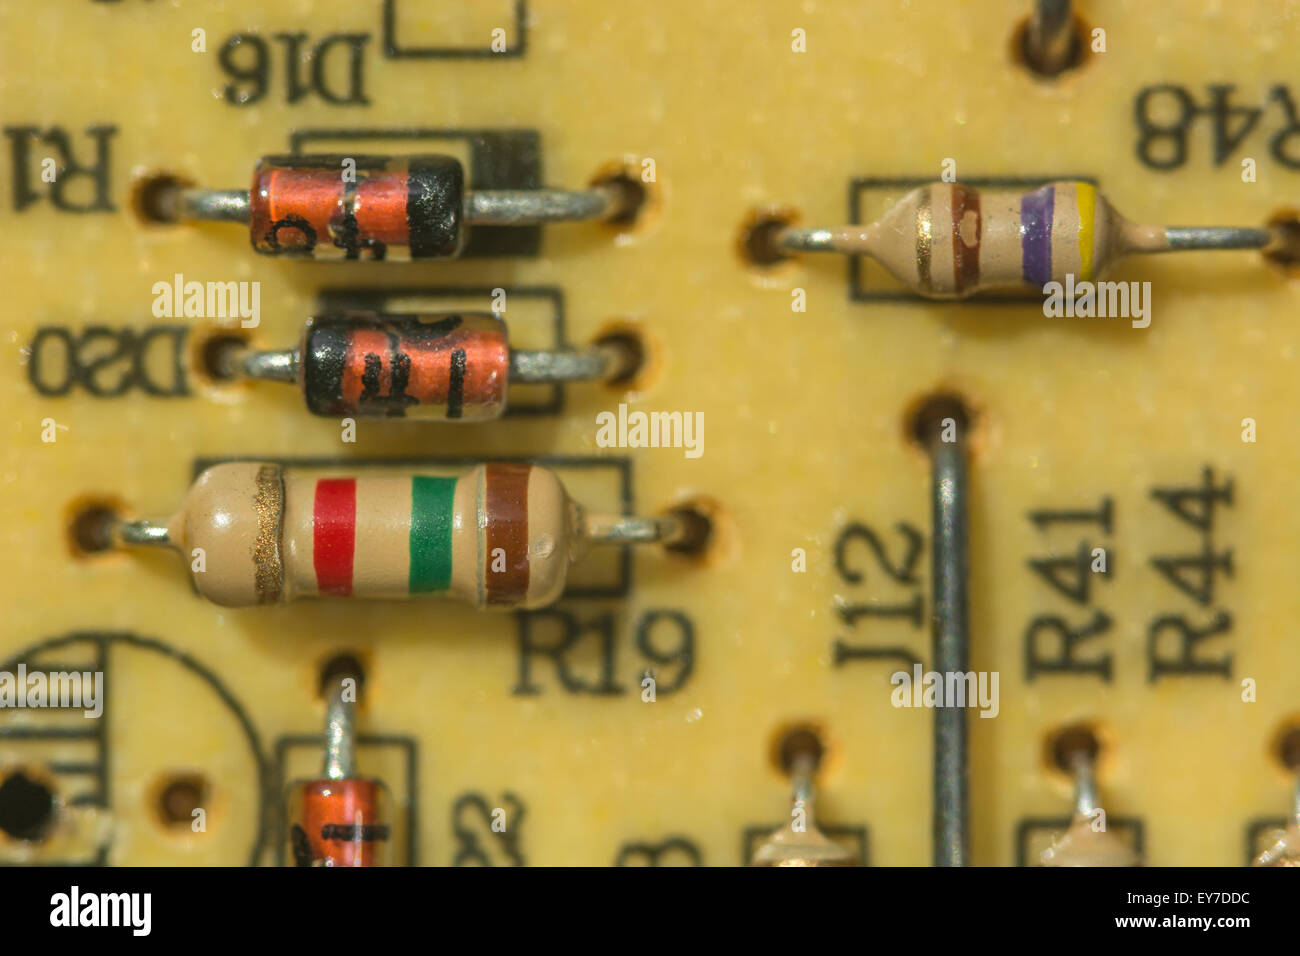 Macro-photo carbon resistors & diodes on traditional through-hole printed circuit board / PCB. Electrical resistance, circuit close up detail shot. Stock Photo